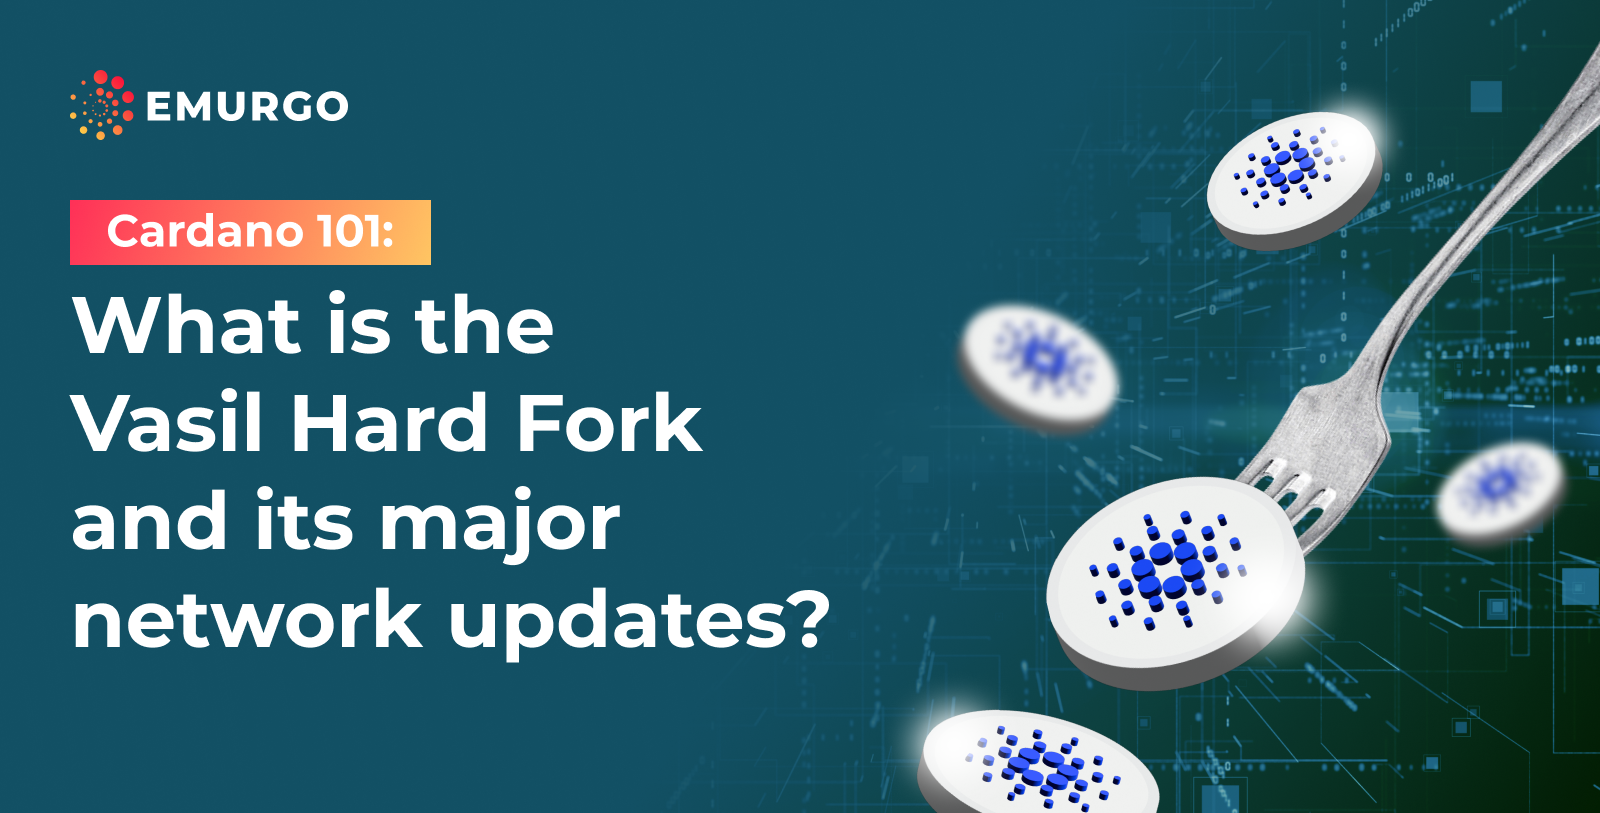 Cardano-101_-What-is-the-Vasil-Hard-Fork-and-its-major-network-updates.png